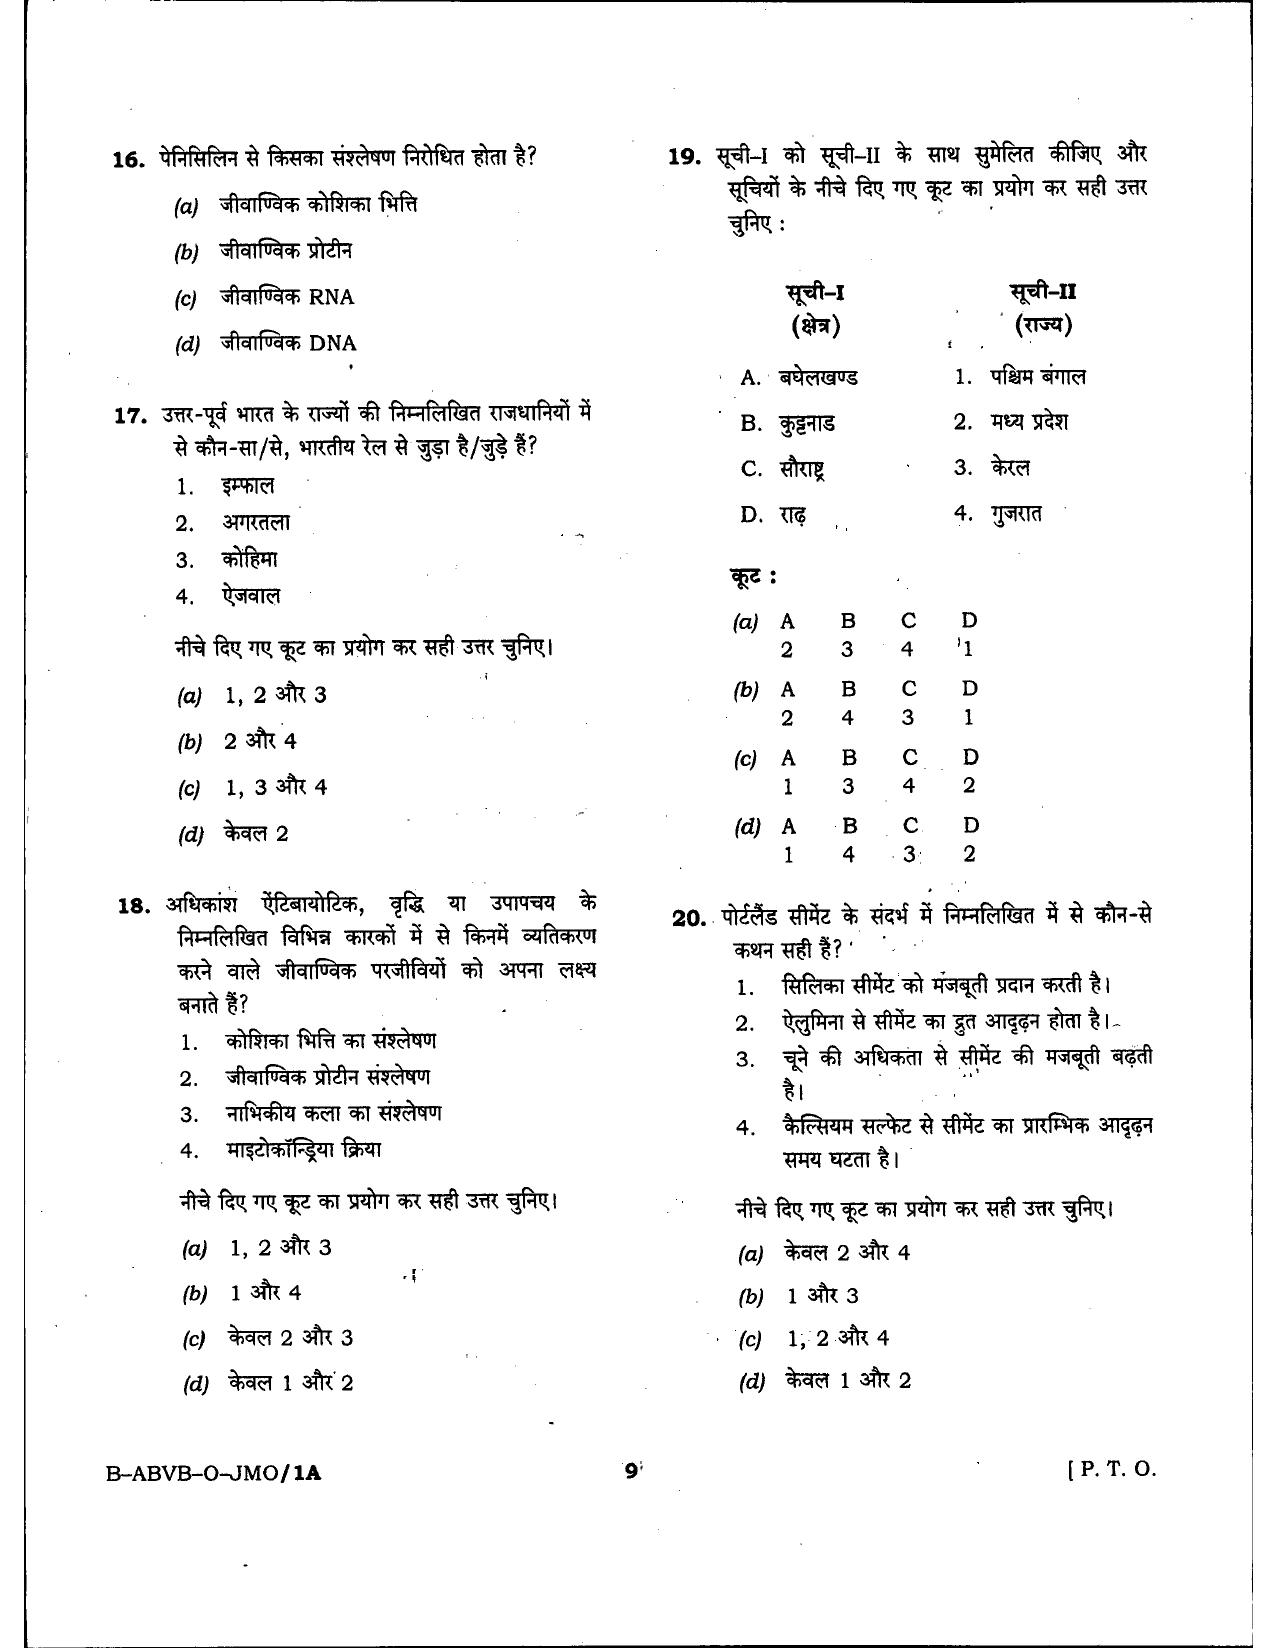 Indian Bank Security Guard Previous Papers: General Knowledge - Page 9